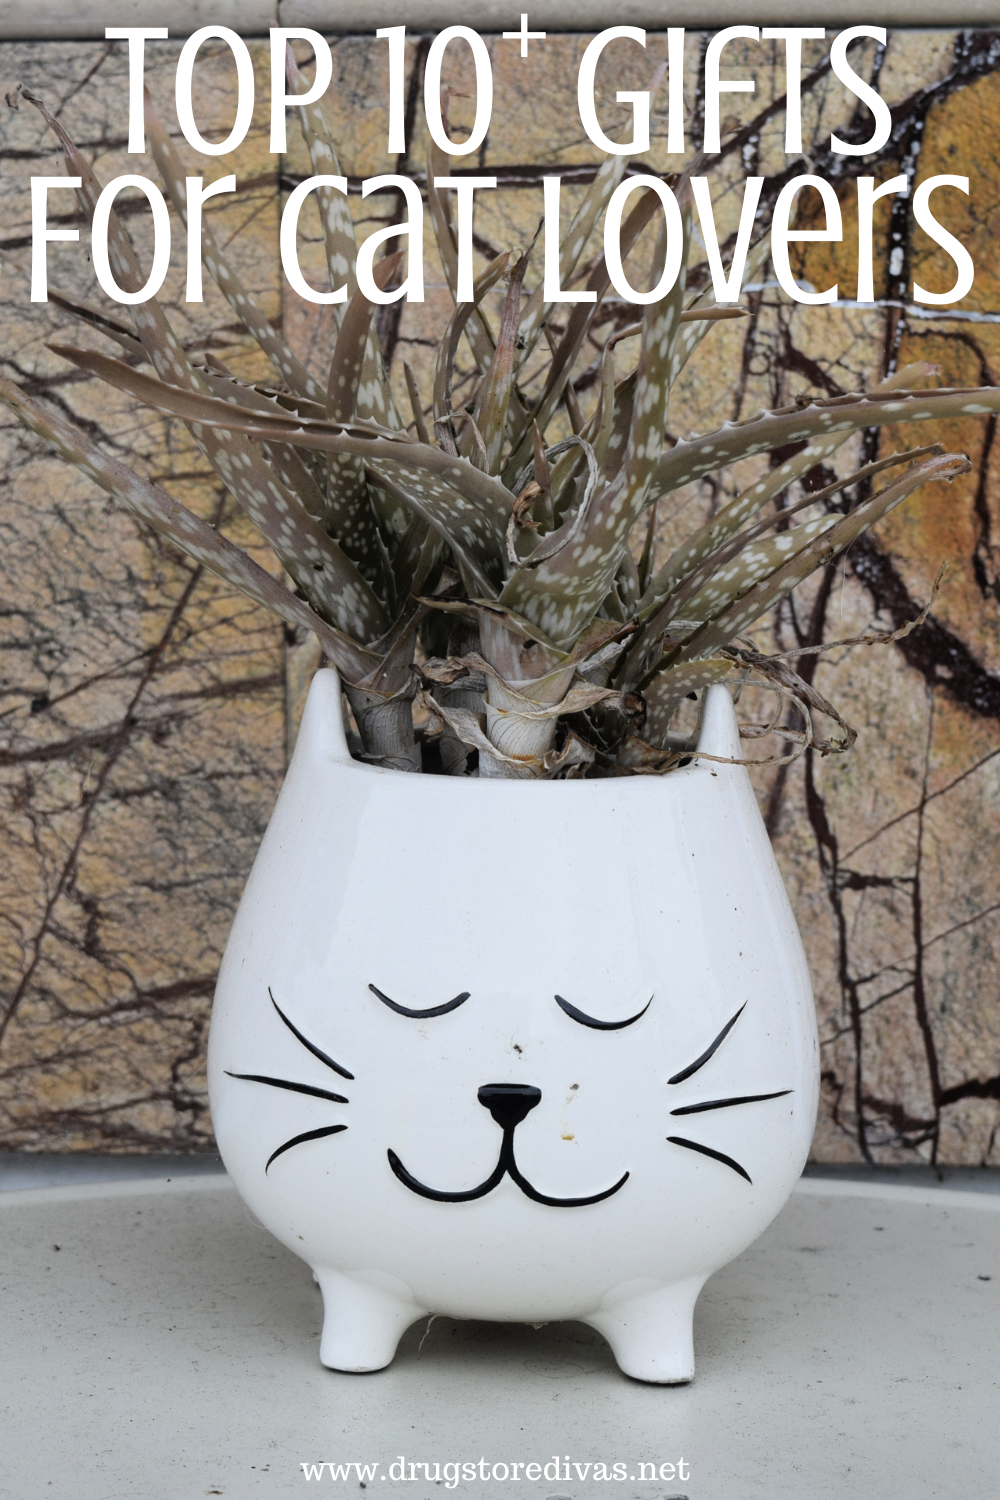 A cat-shaped planter with the words 